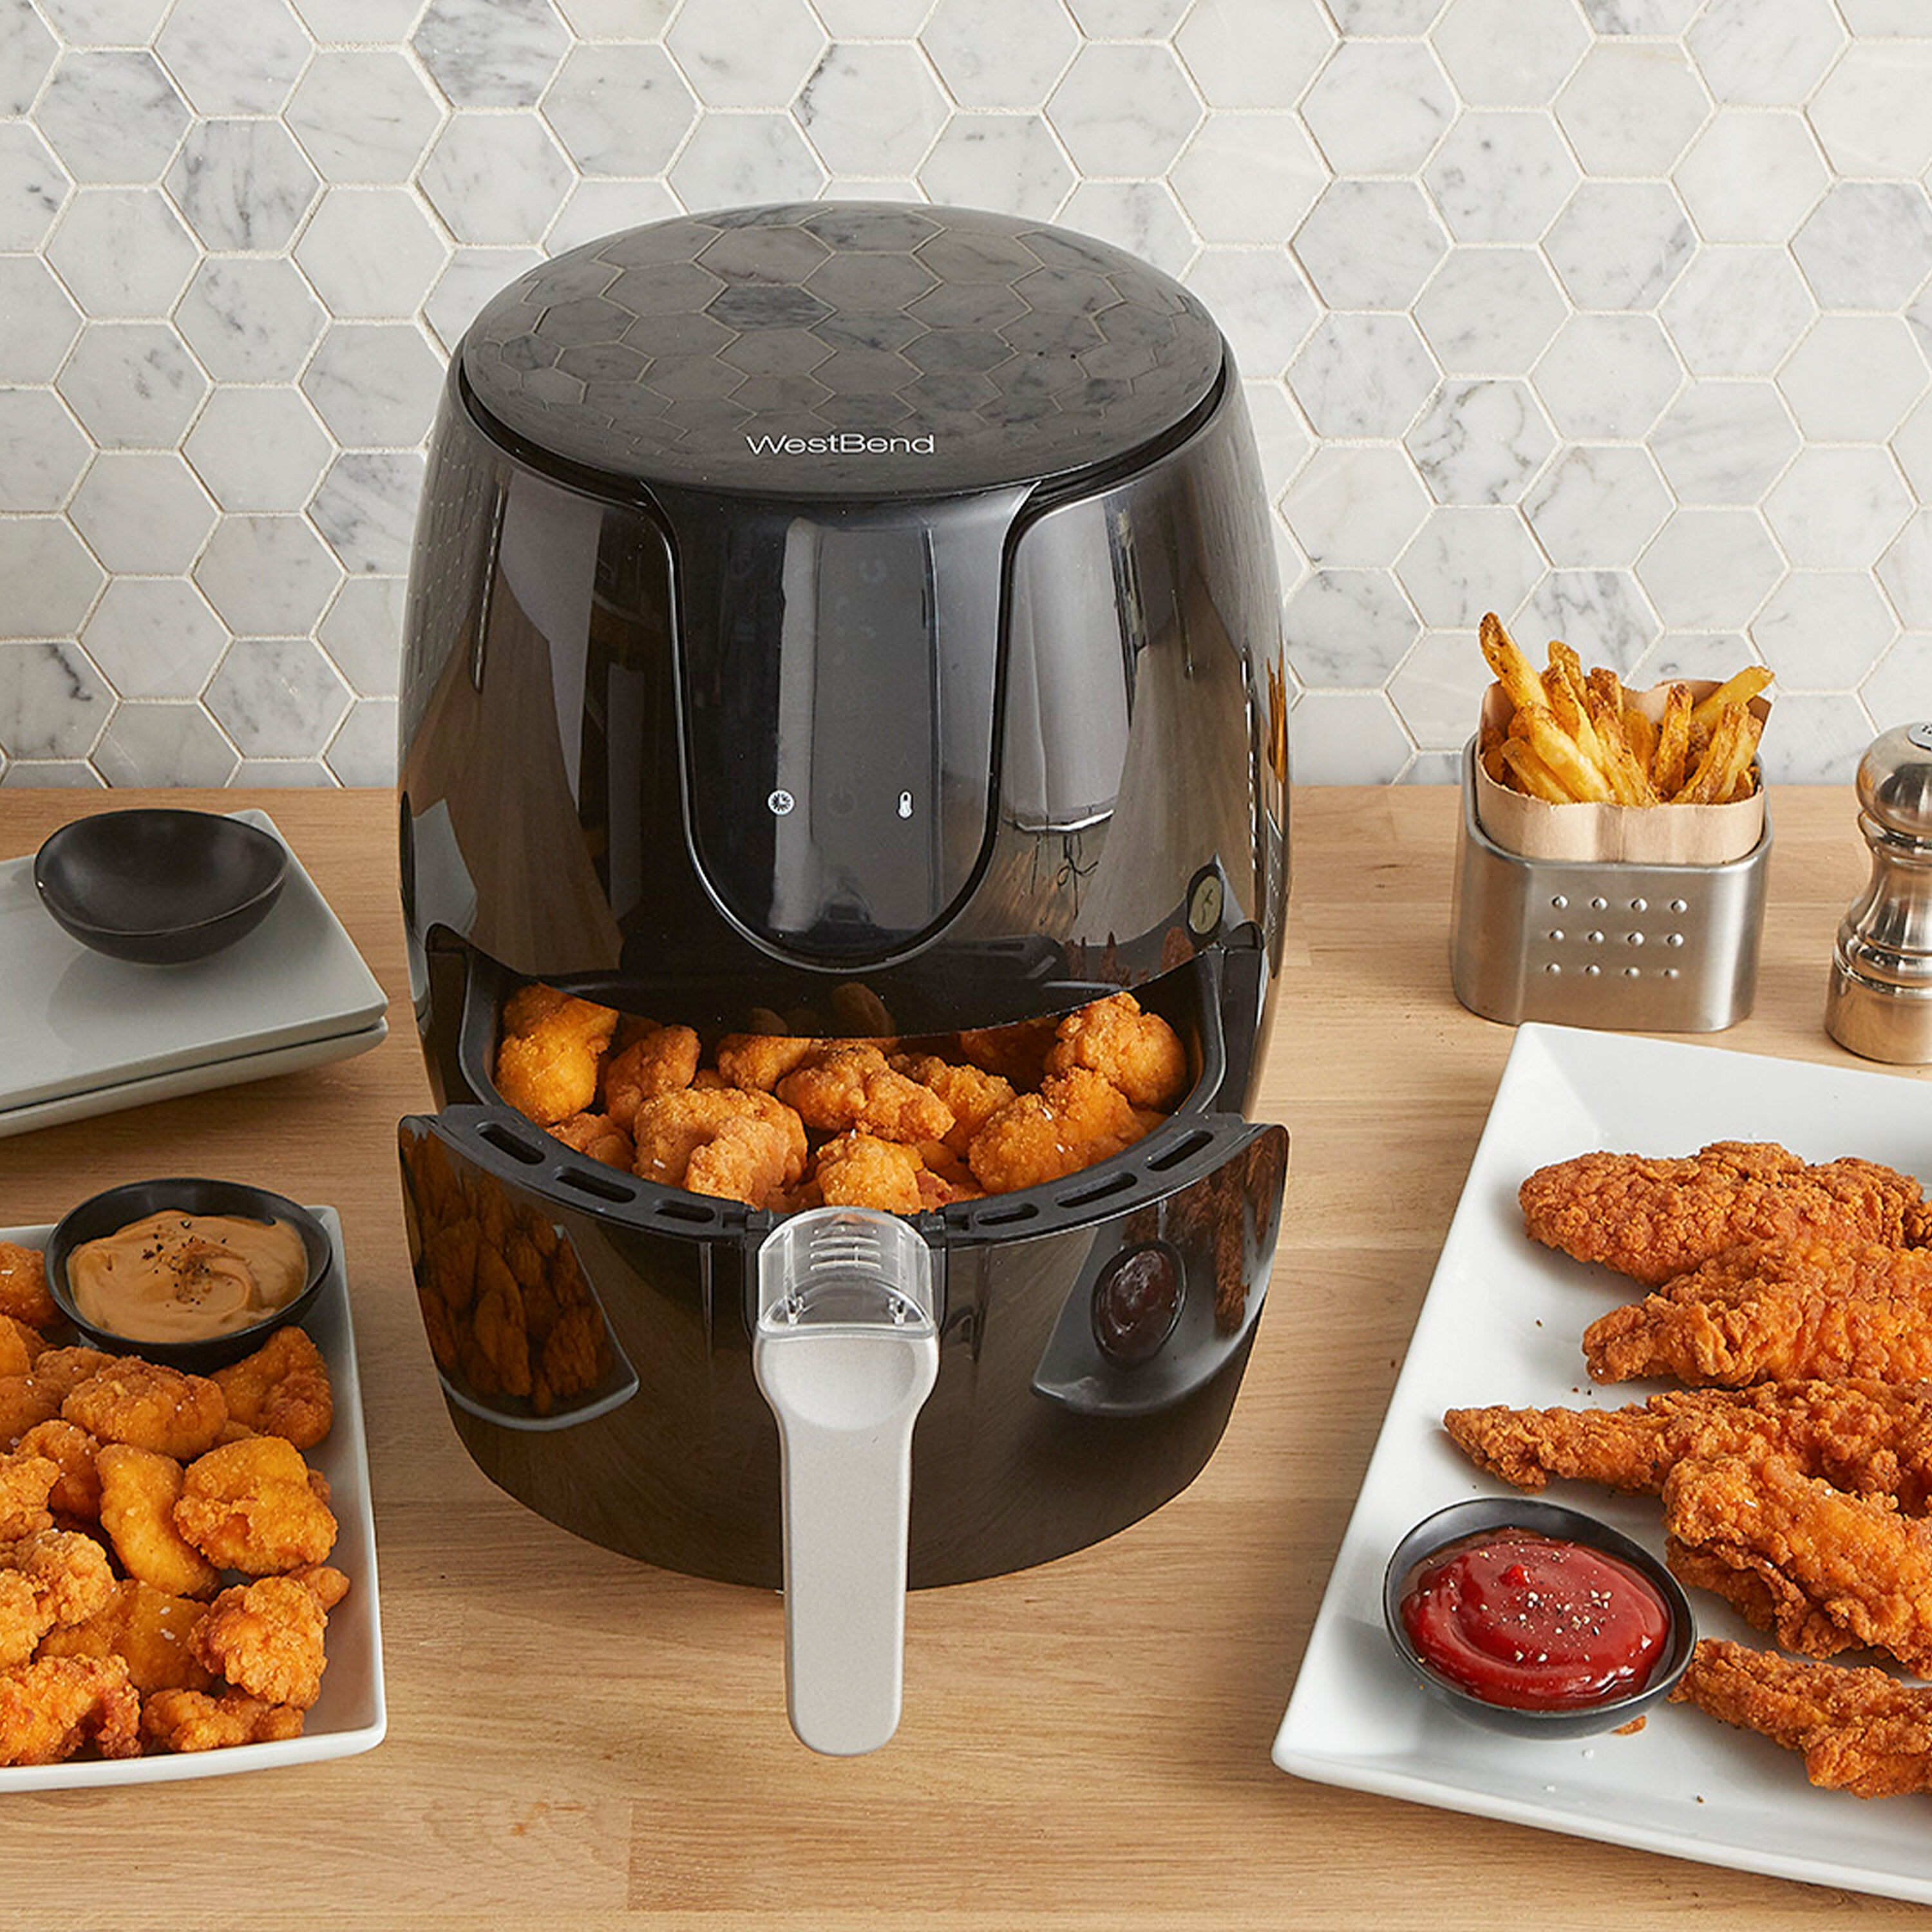 West Bend Air Fryer 7-Quart Capacity with Digital Controls View Window and  13 Cooking Presets, Nonstick Frying Basket, 1700-Watts, Black